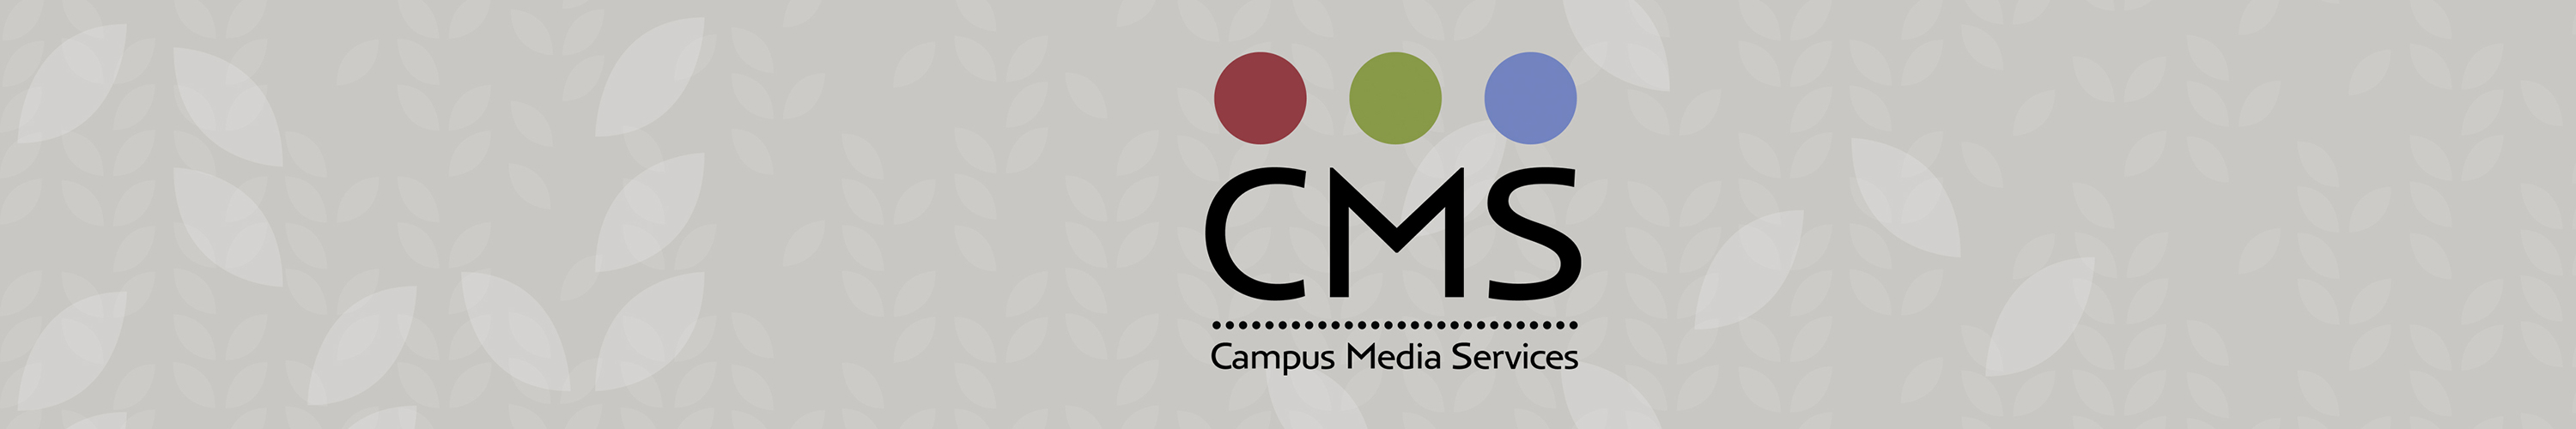 CMS logo banner with wheat motif background